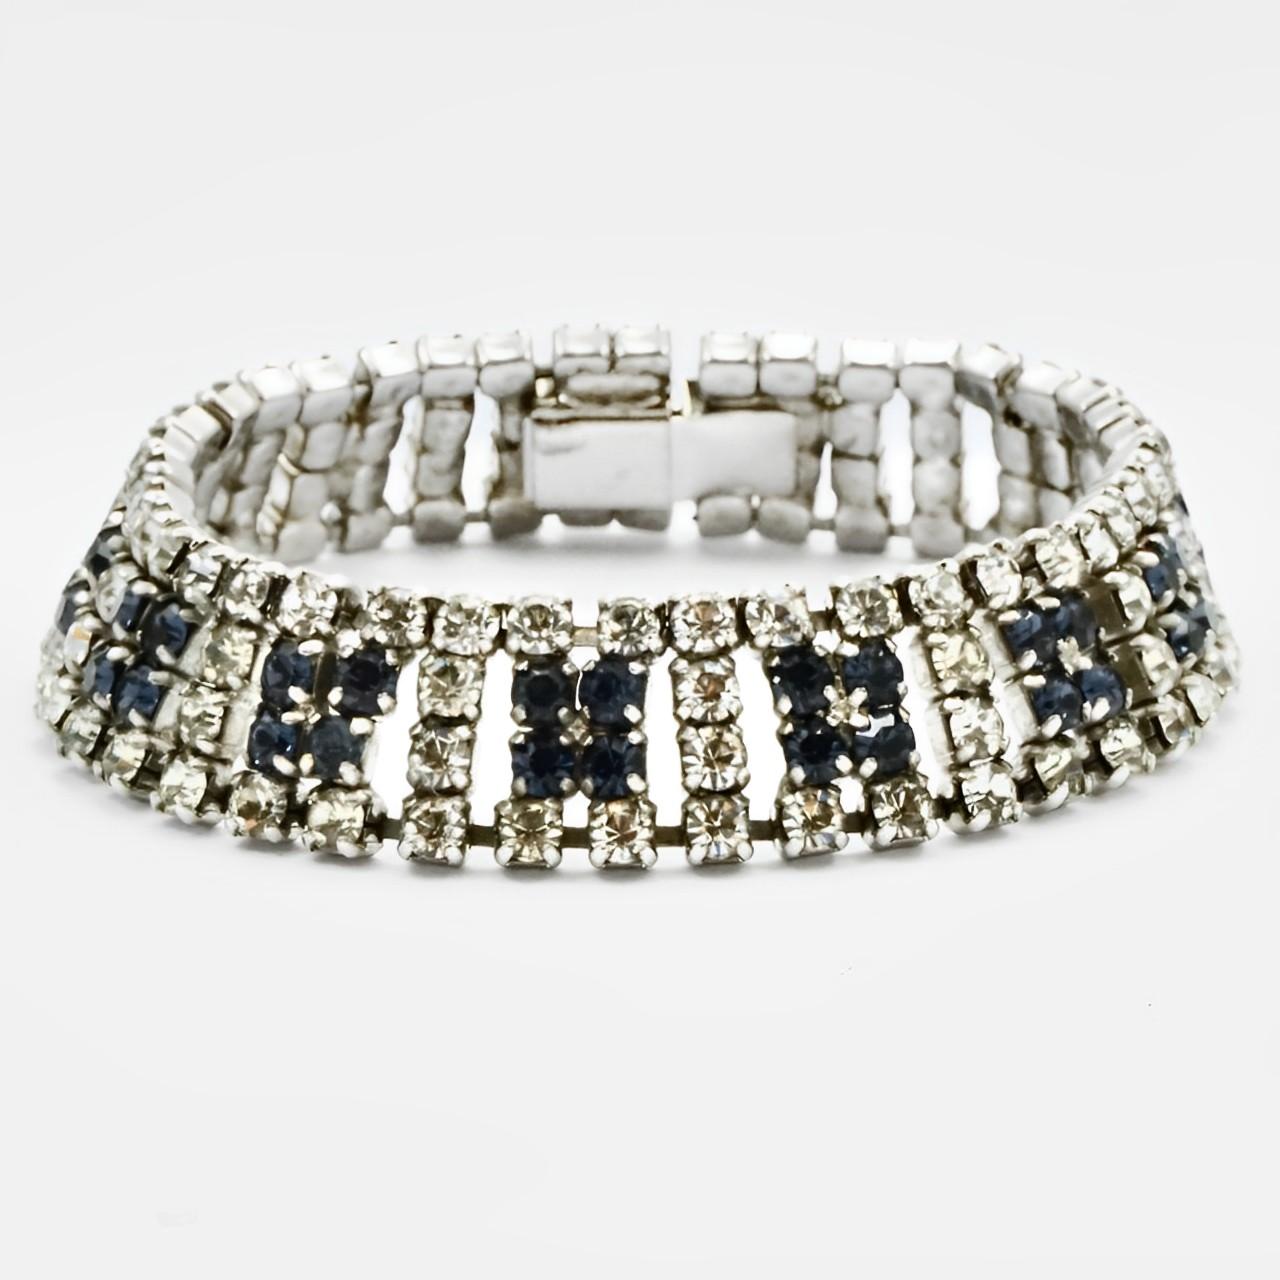 Women's or Men's Silver Tone Clear and Blue Rhinestones Bracelet circa 1950s For Sale